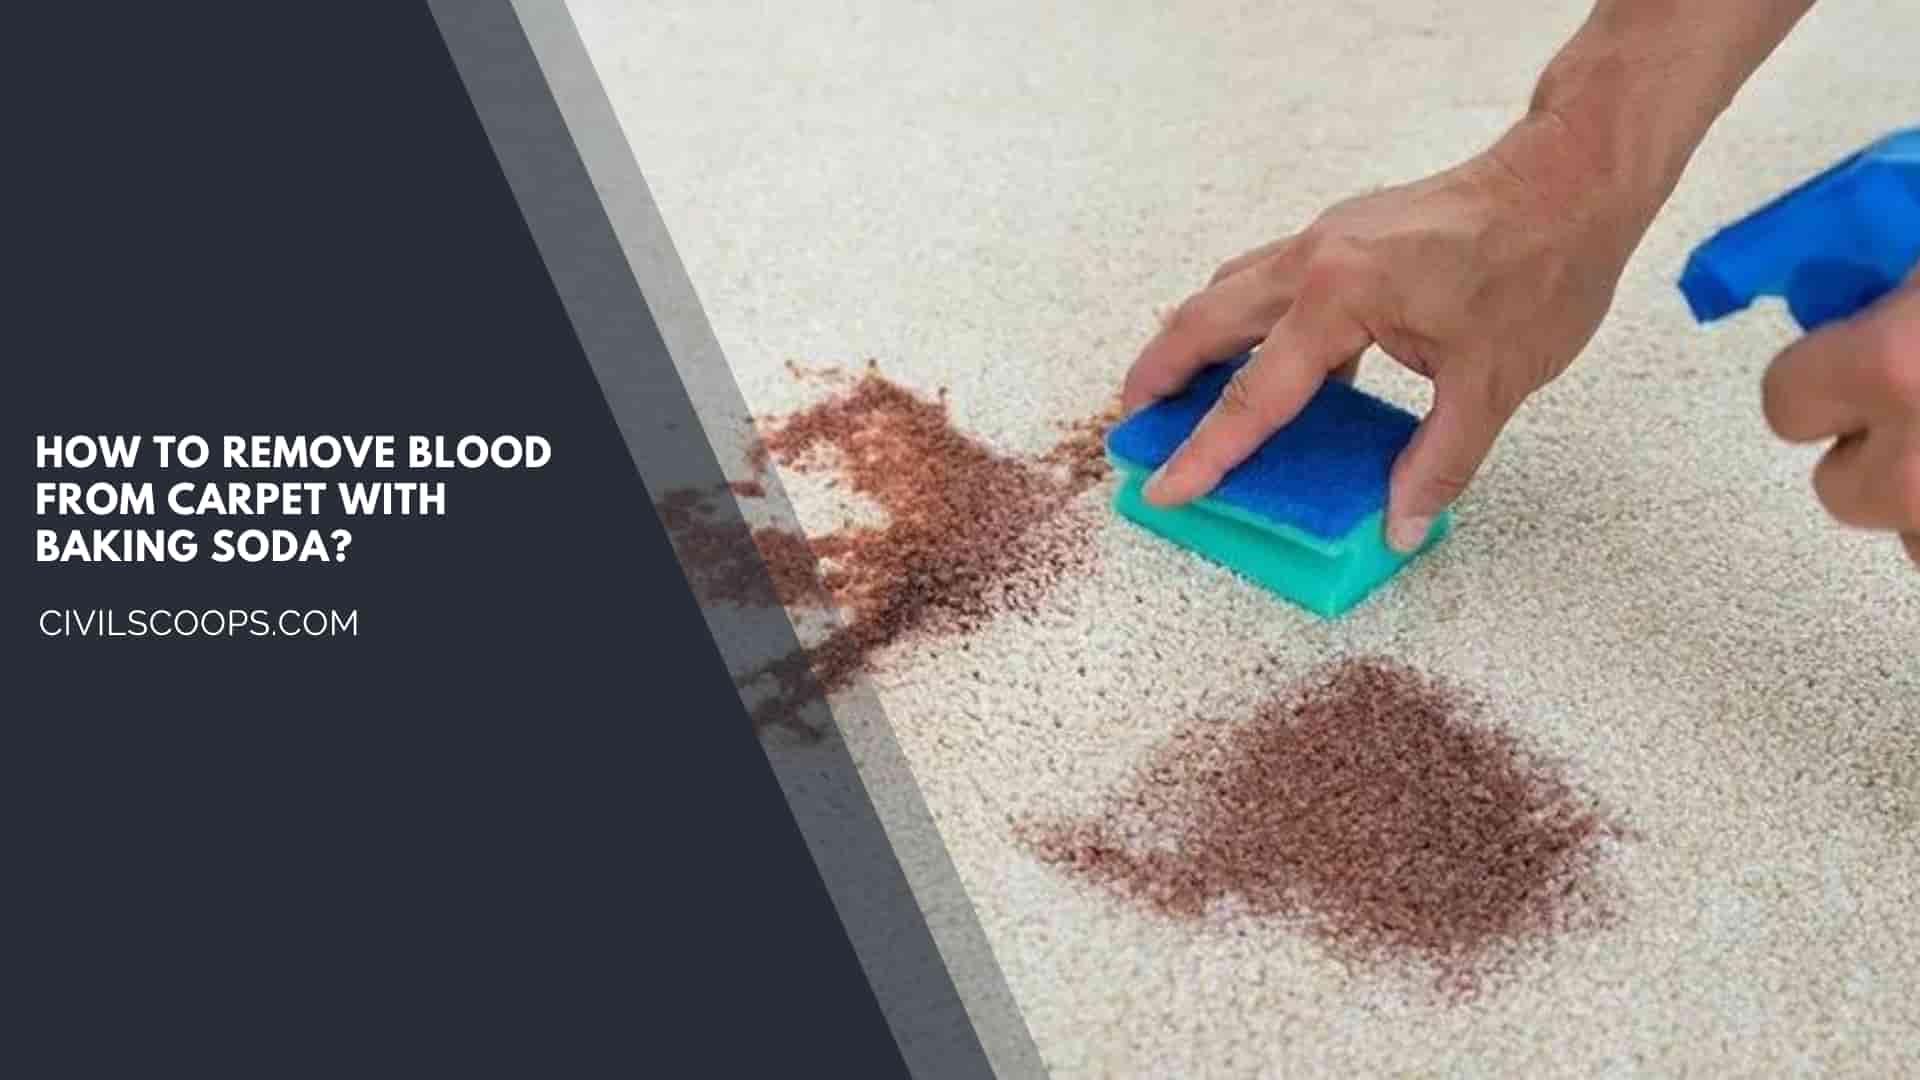 How to Remove Blood from Carpet with Baking Soda?